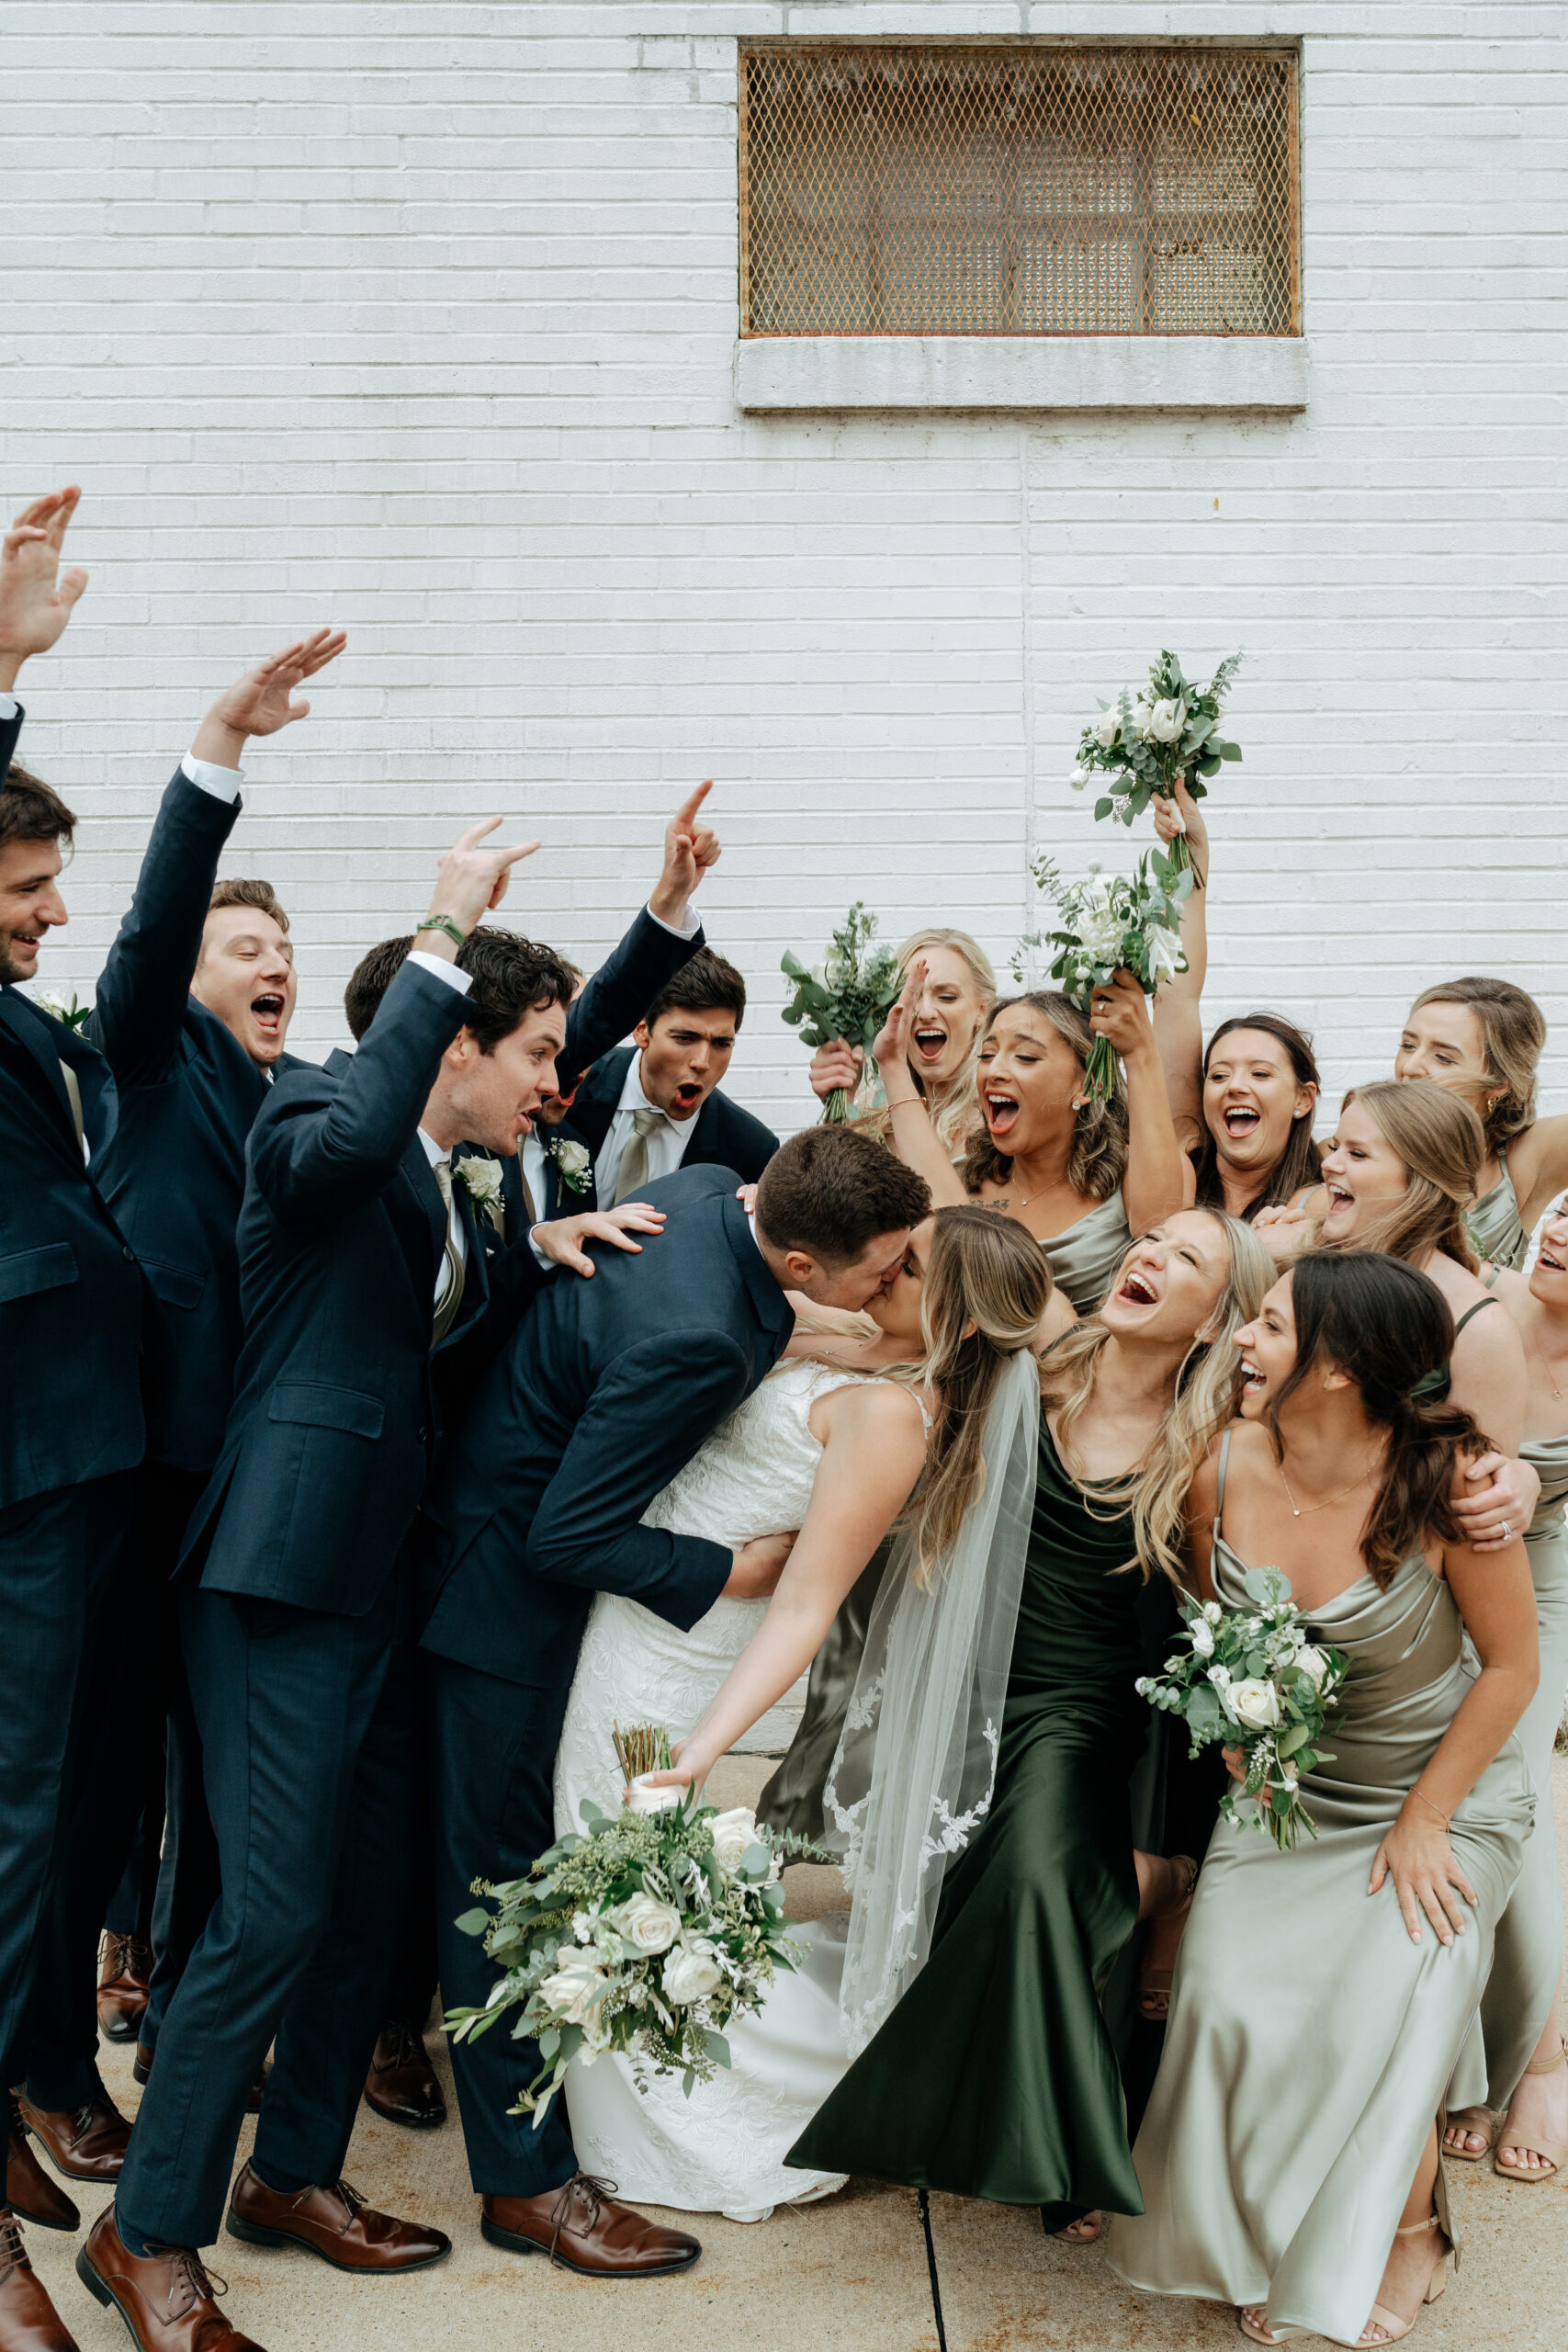 This is a picture of a bridal party taking pictures on the wedding day